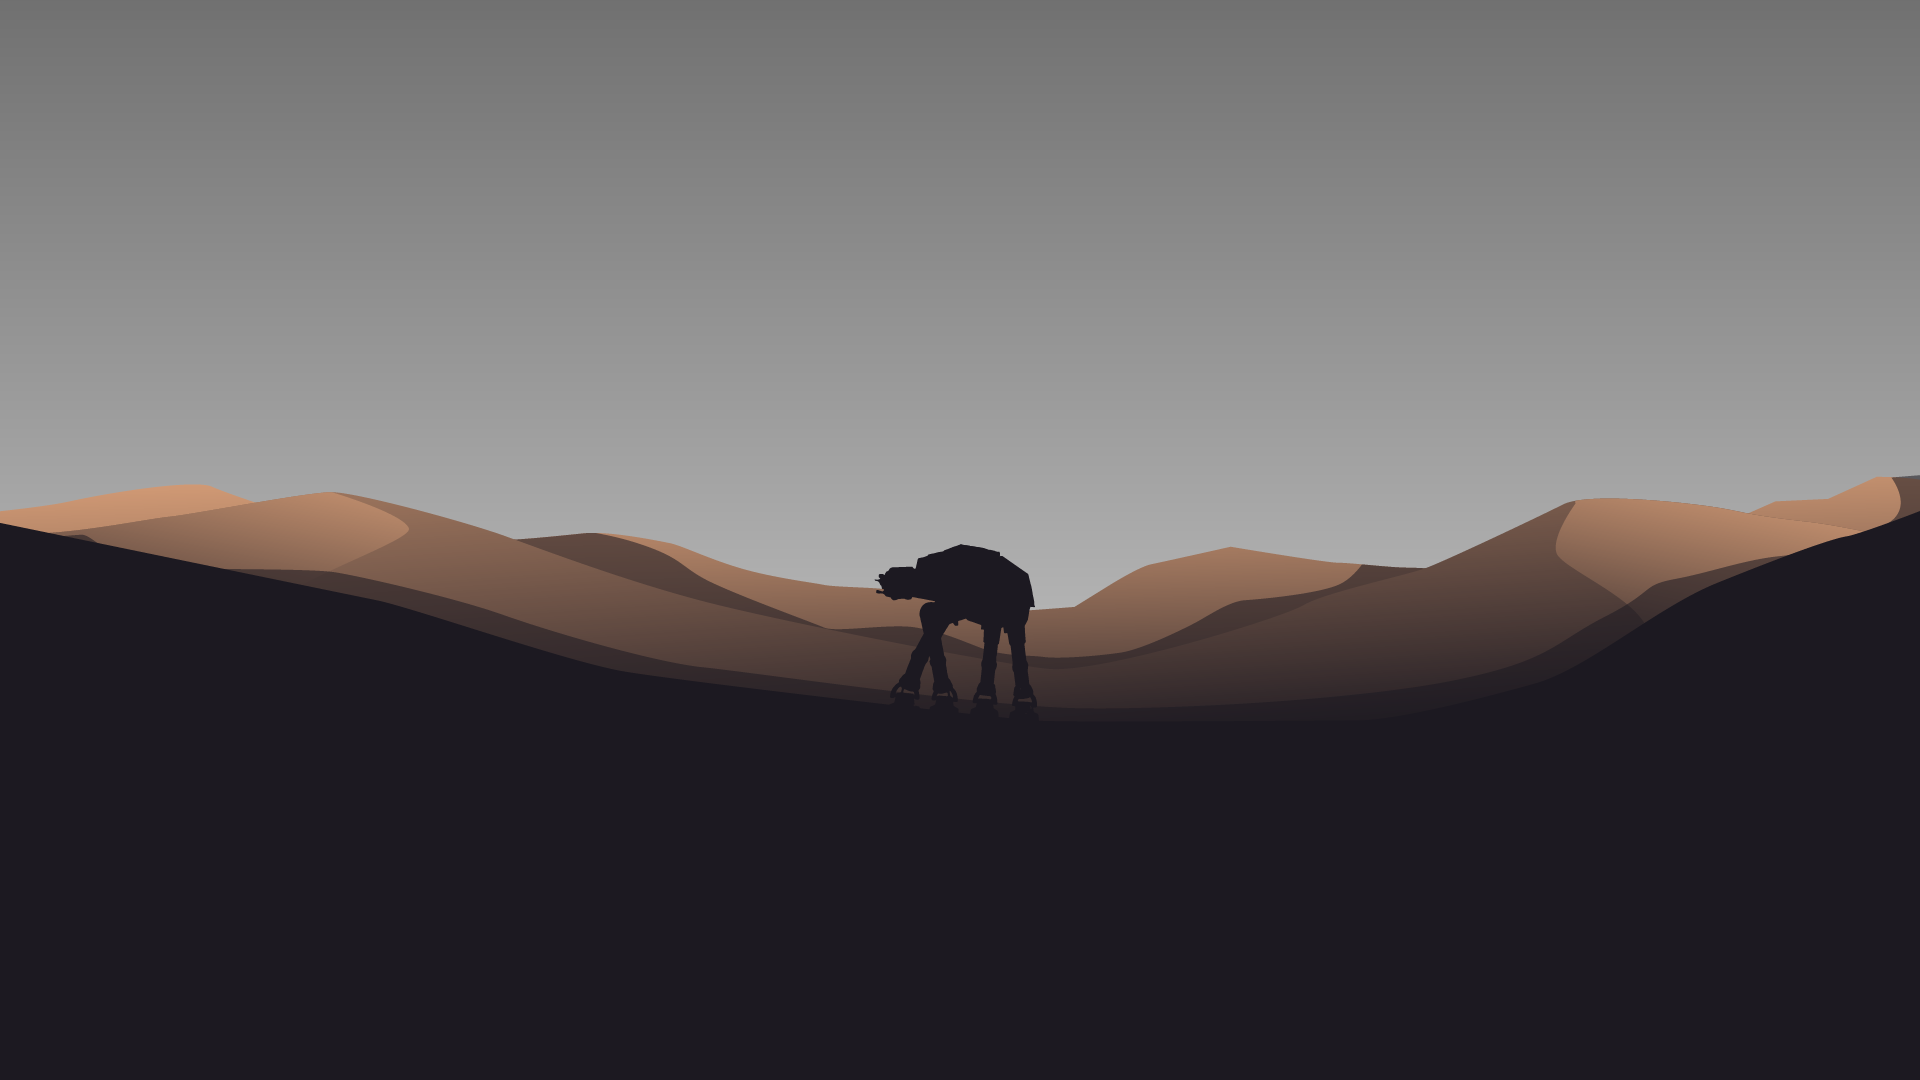 50 Minimalist Desktop Wallpapers and Backgrounds 2022 Edition